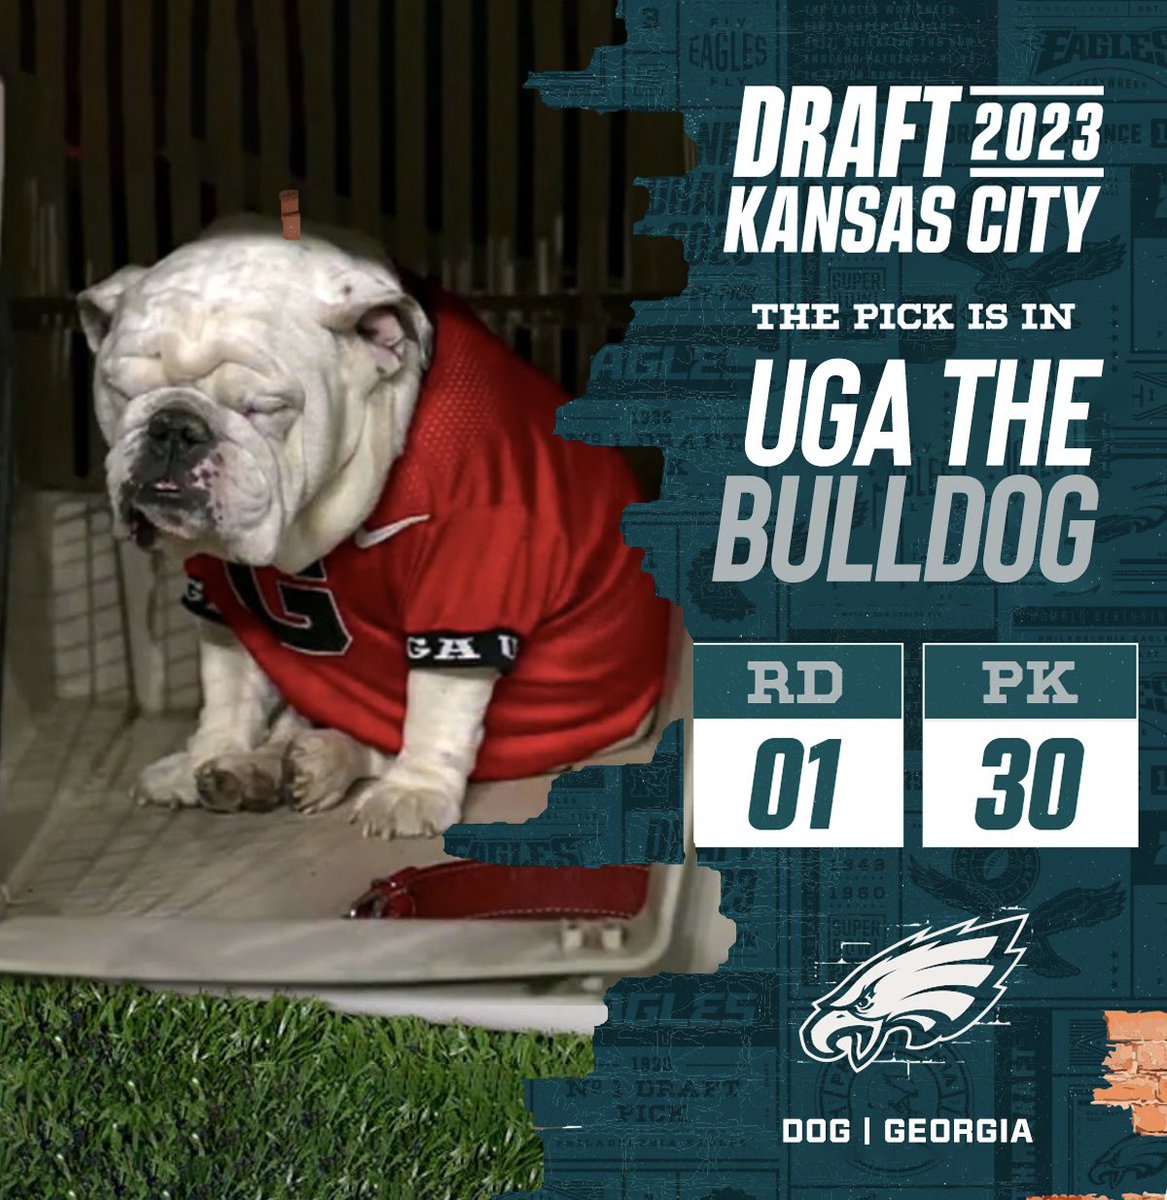 Oh my god the Eagles just drafted the actual Georgia bulldog